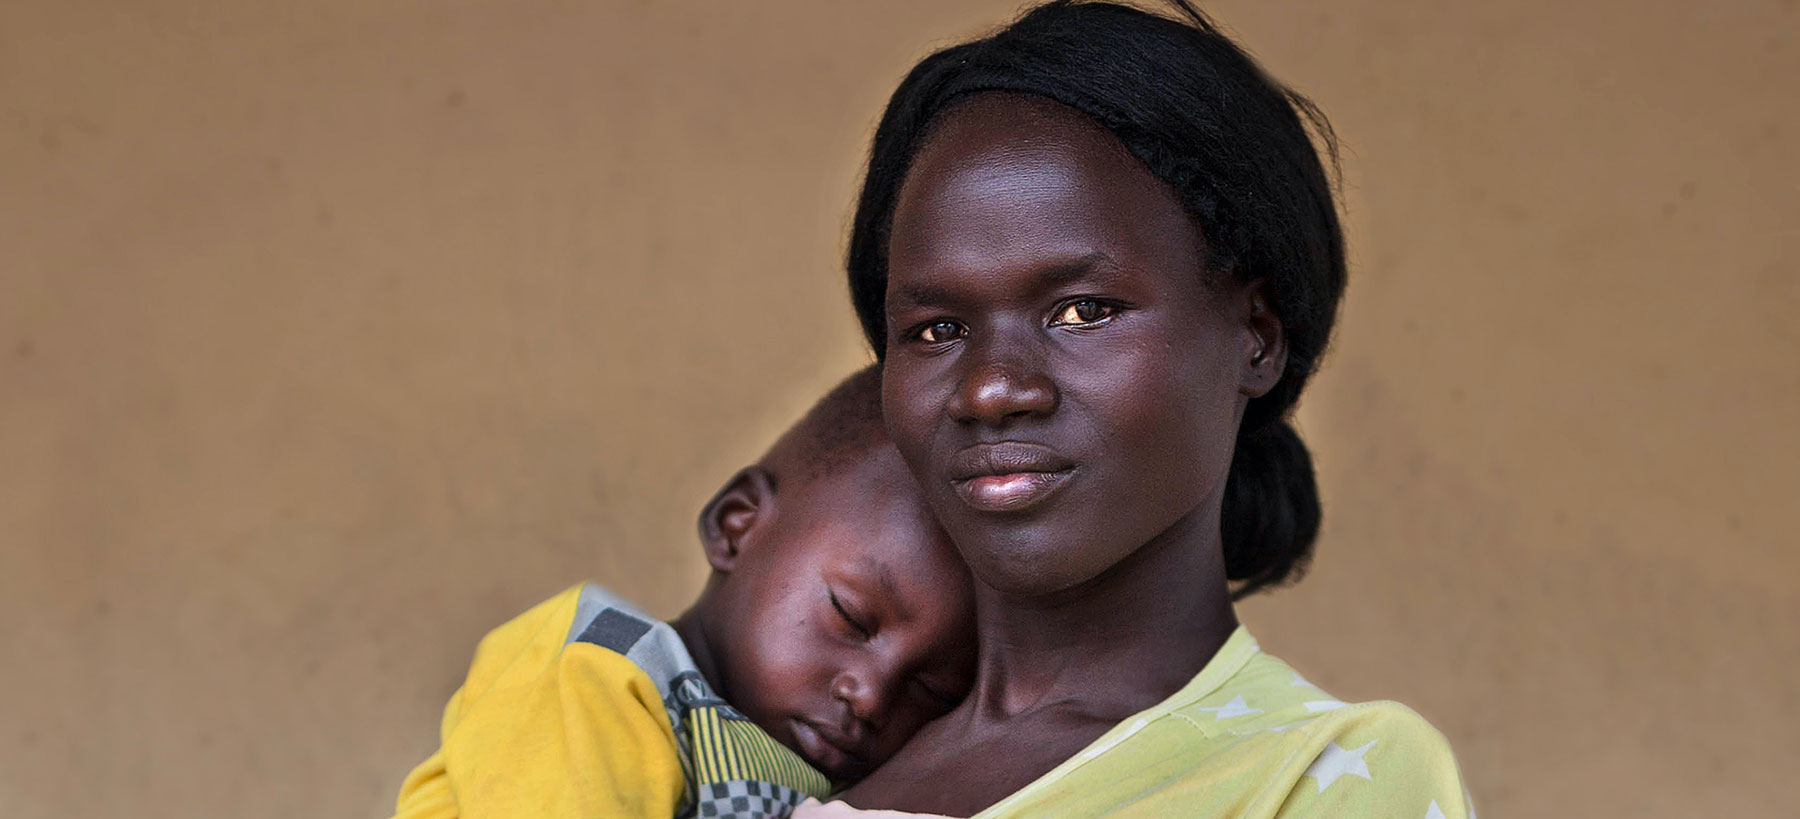 Nyadiu* (28) with her youngest son, Kowey* (1 year and 9 months) outside of a maternal and child health clinic in war-torn South Sudan. (Photo: Abbie Trayler-Smith)